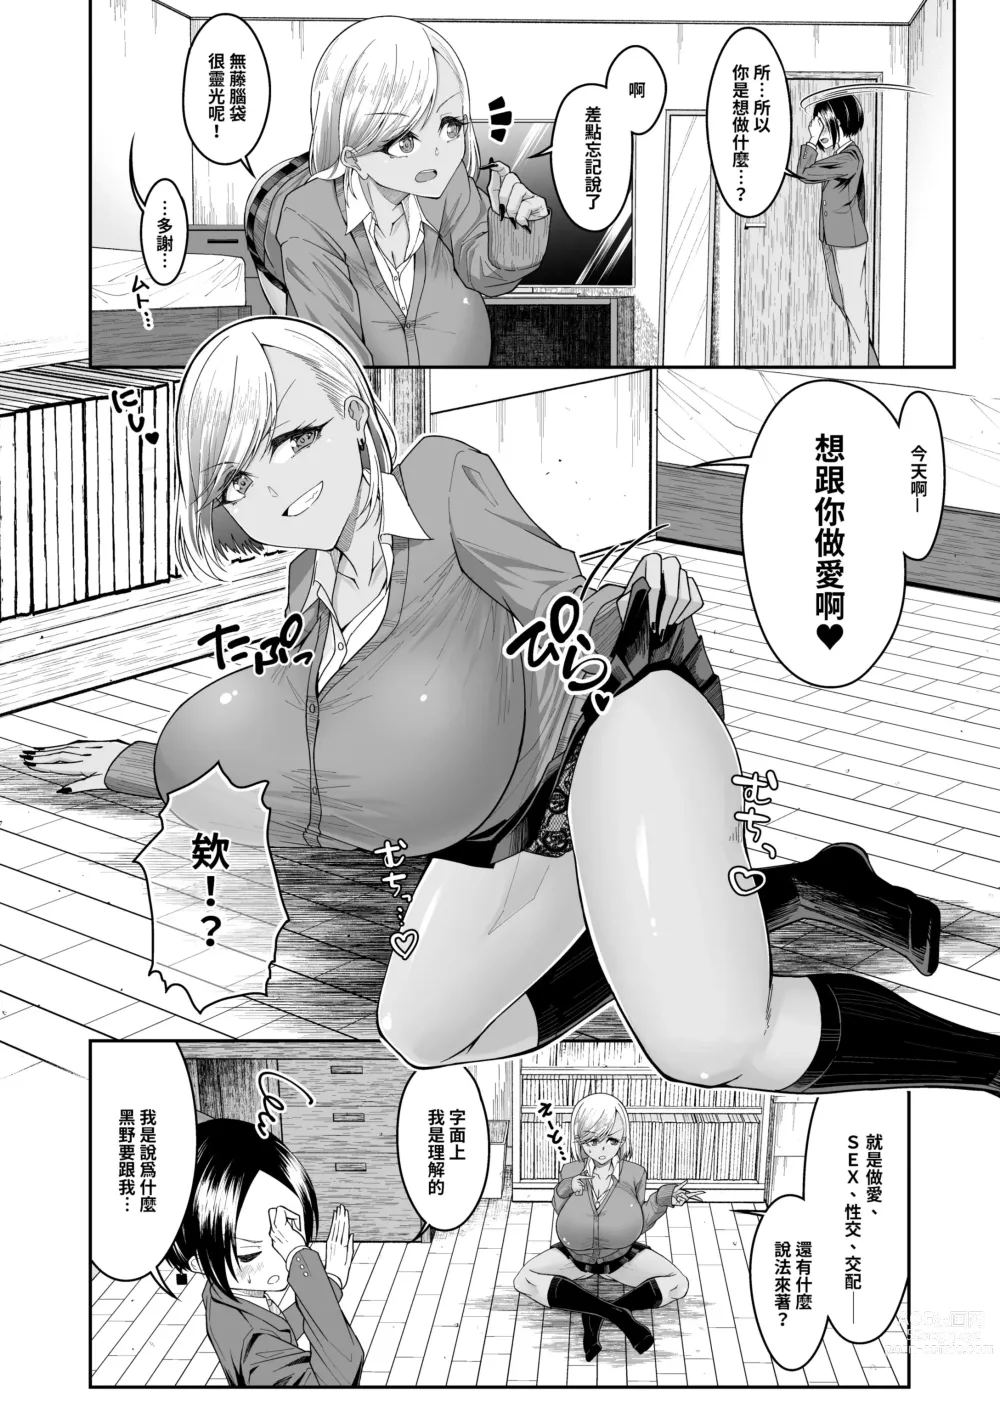 Page 3 of doujinshi 白肉的軟棉與黑肉的軟彈